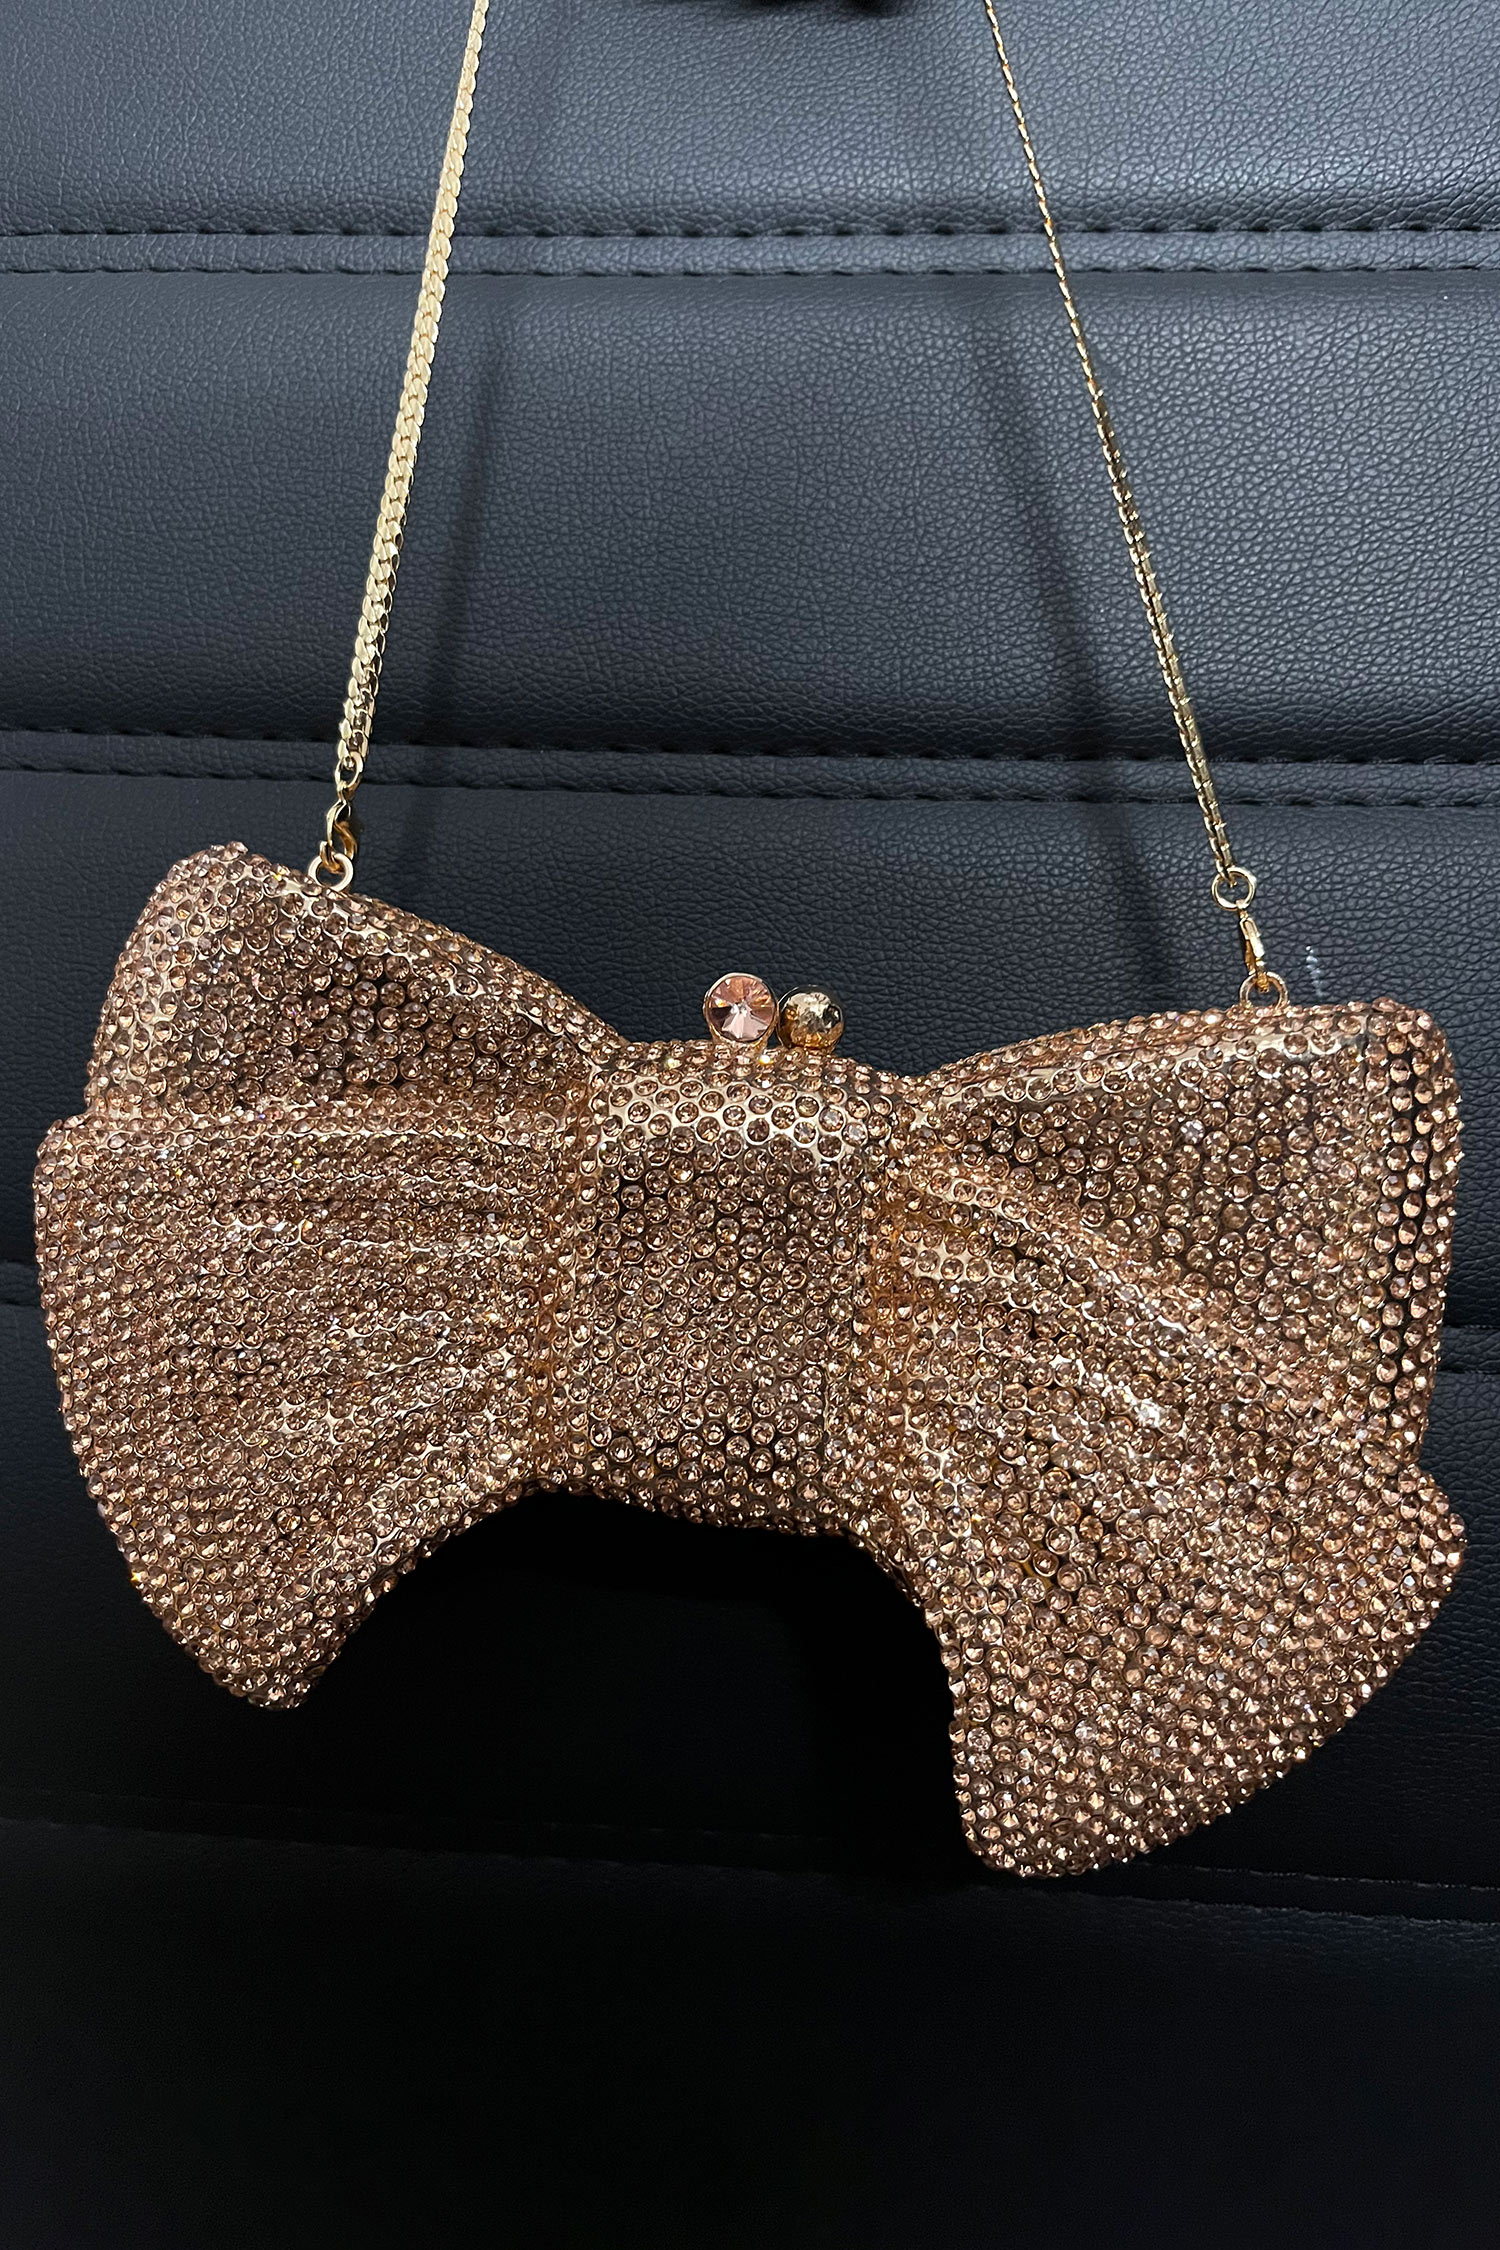 Buy Gold Embellished Crystal Studded Bow Shaped Clutch by House of